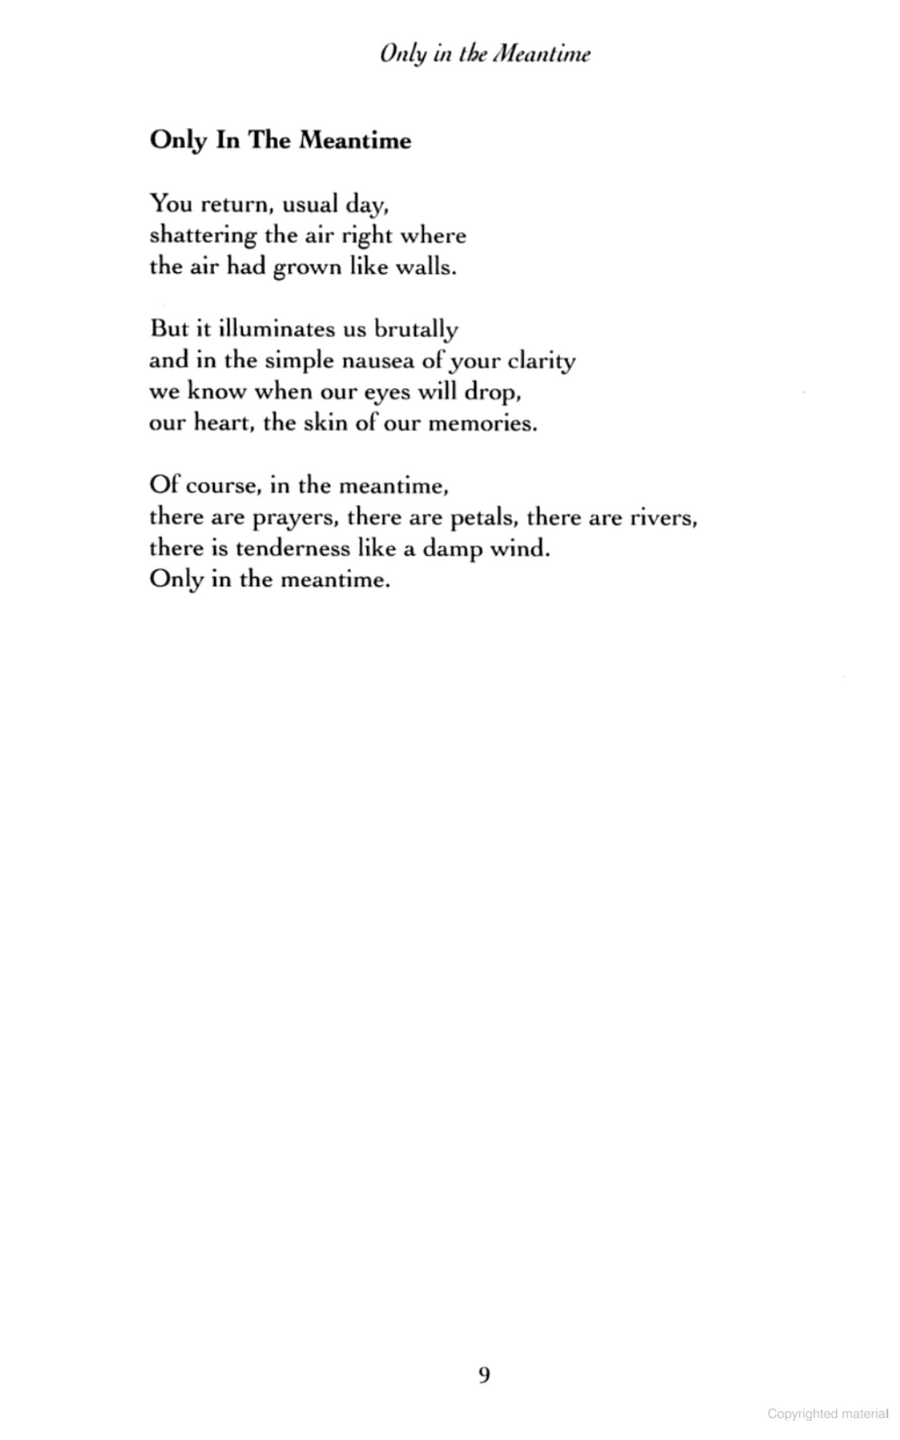 Only in the Meantime and Office Poems by Mario Benedetti